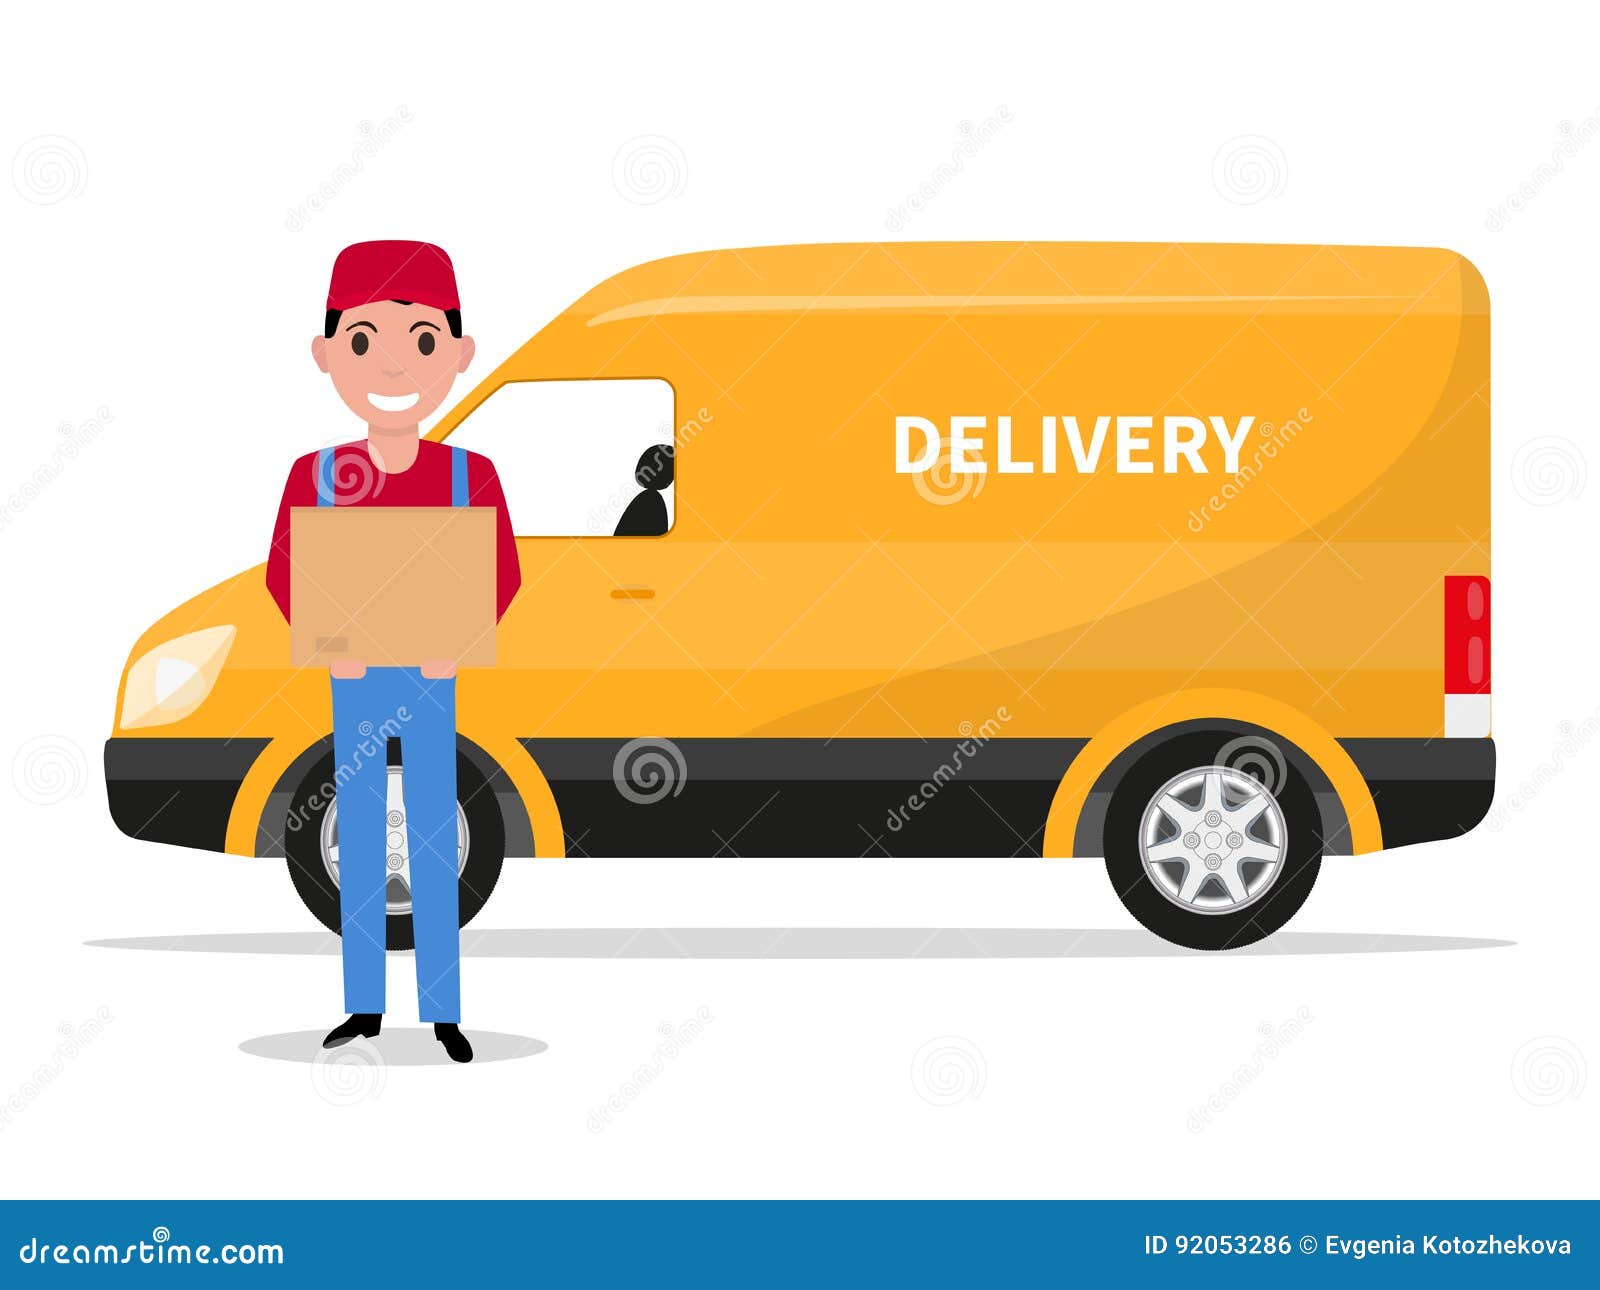 Cartoon Delivery Man Stock Illustrations – 27,406 Cartoon Delivery Man  Stock Illustrations, Vectors & Clipart - Dreamstime